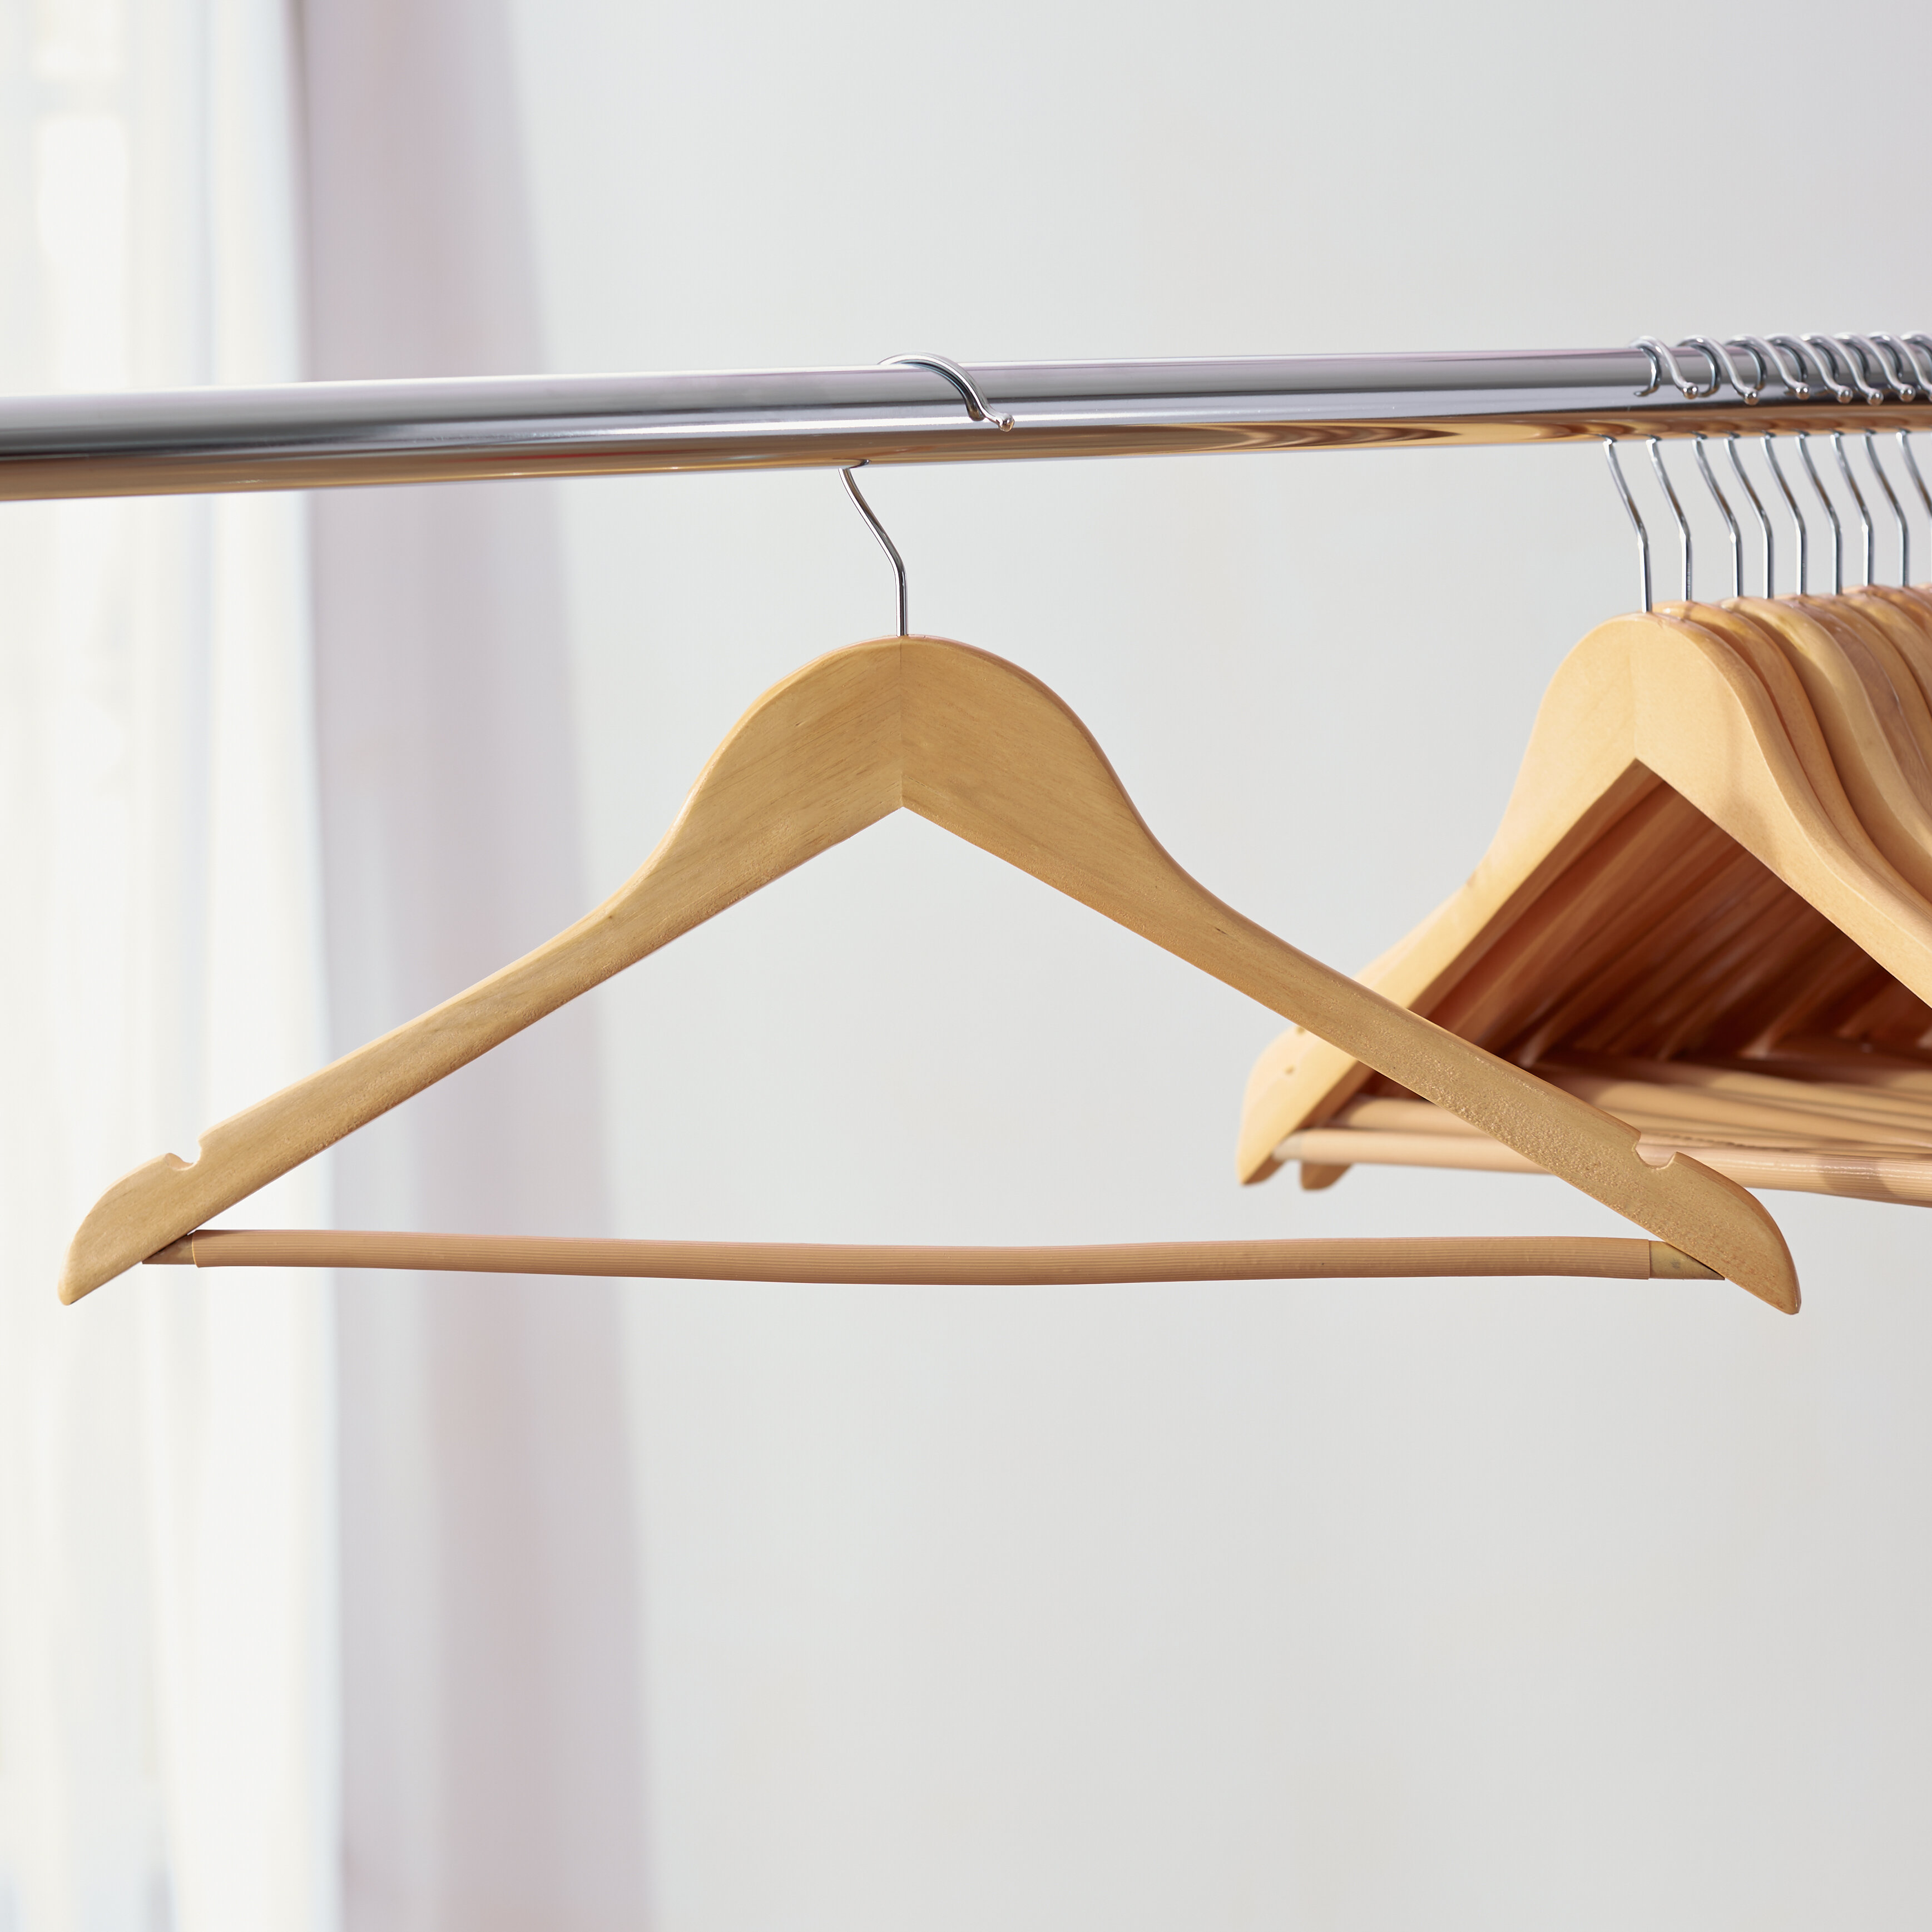 Quality Hangers 10 Quality Hangers Curved Wooden Hangers Beautiful